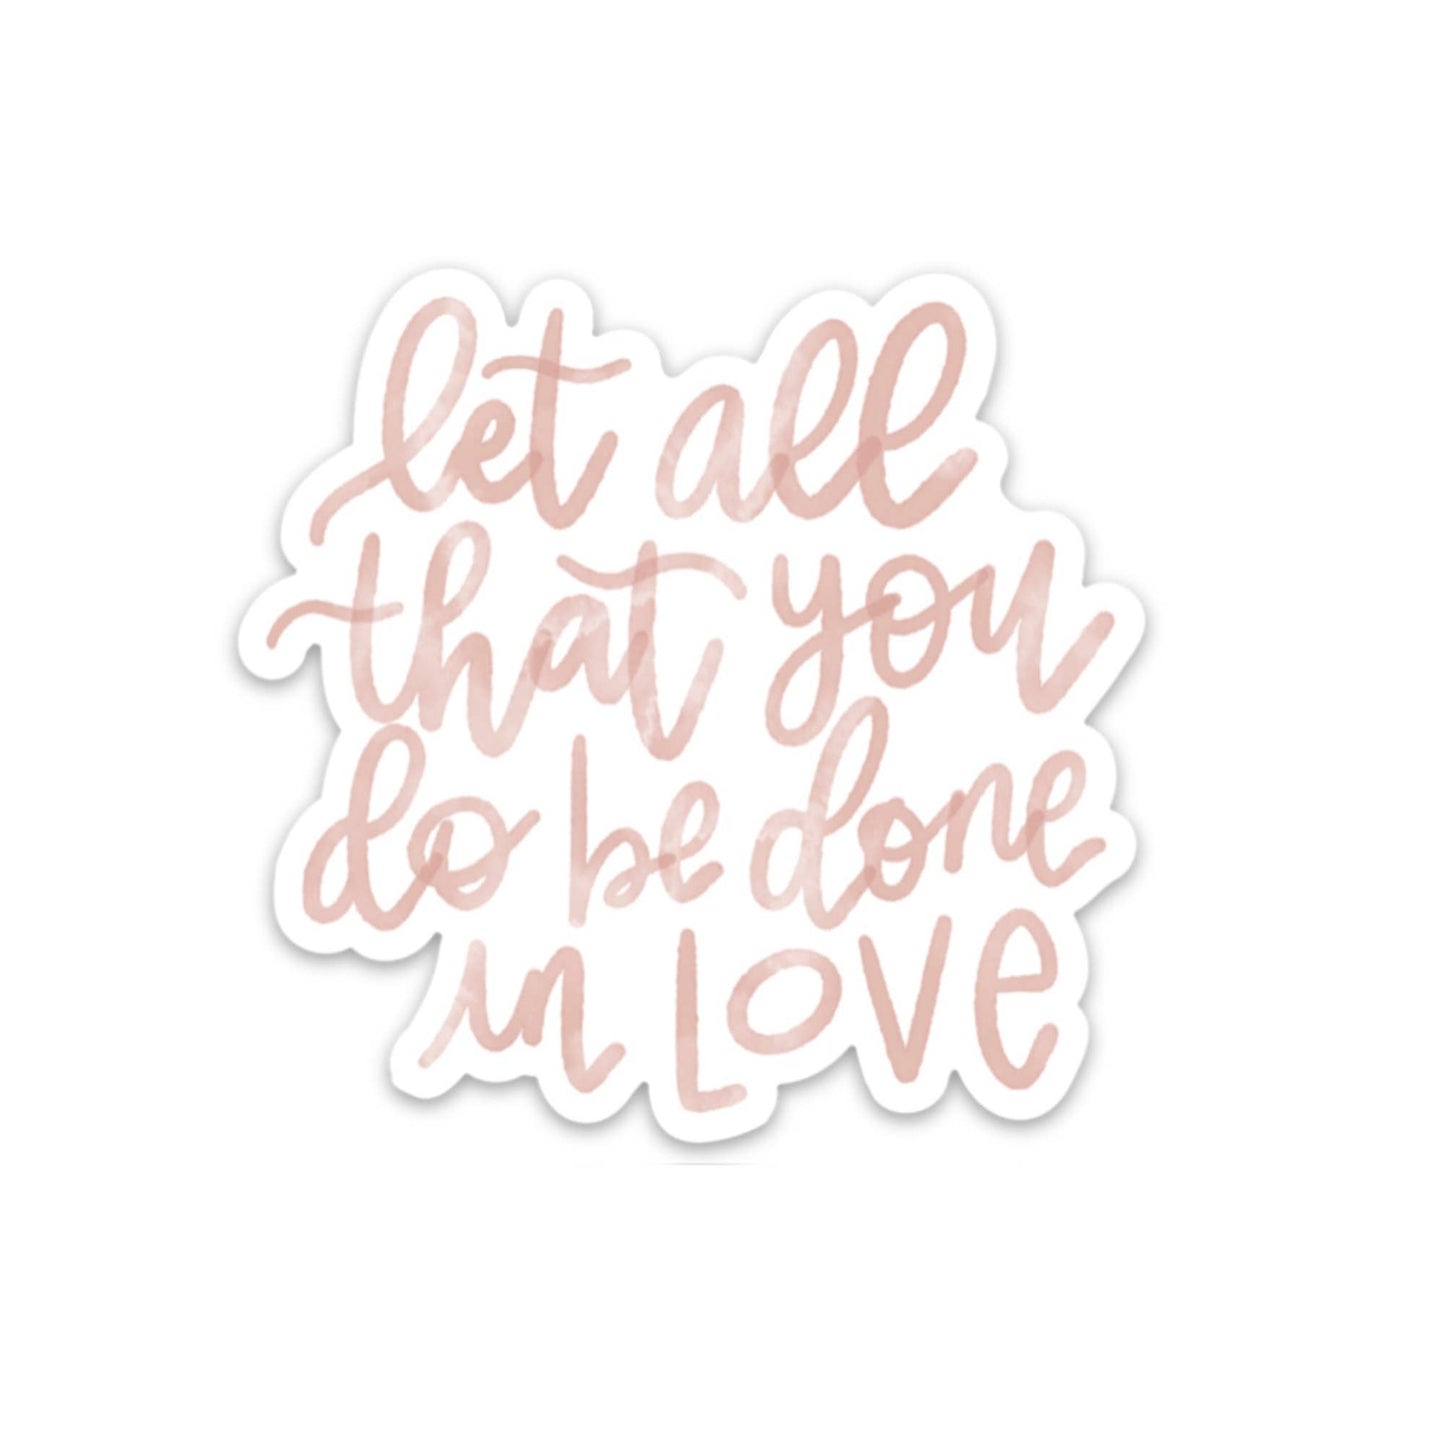 1 Corinthians 16:14 love sticker | Christian gifts - The Dragonfly Boutique